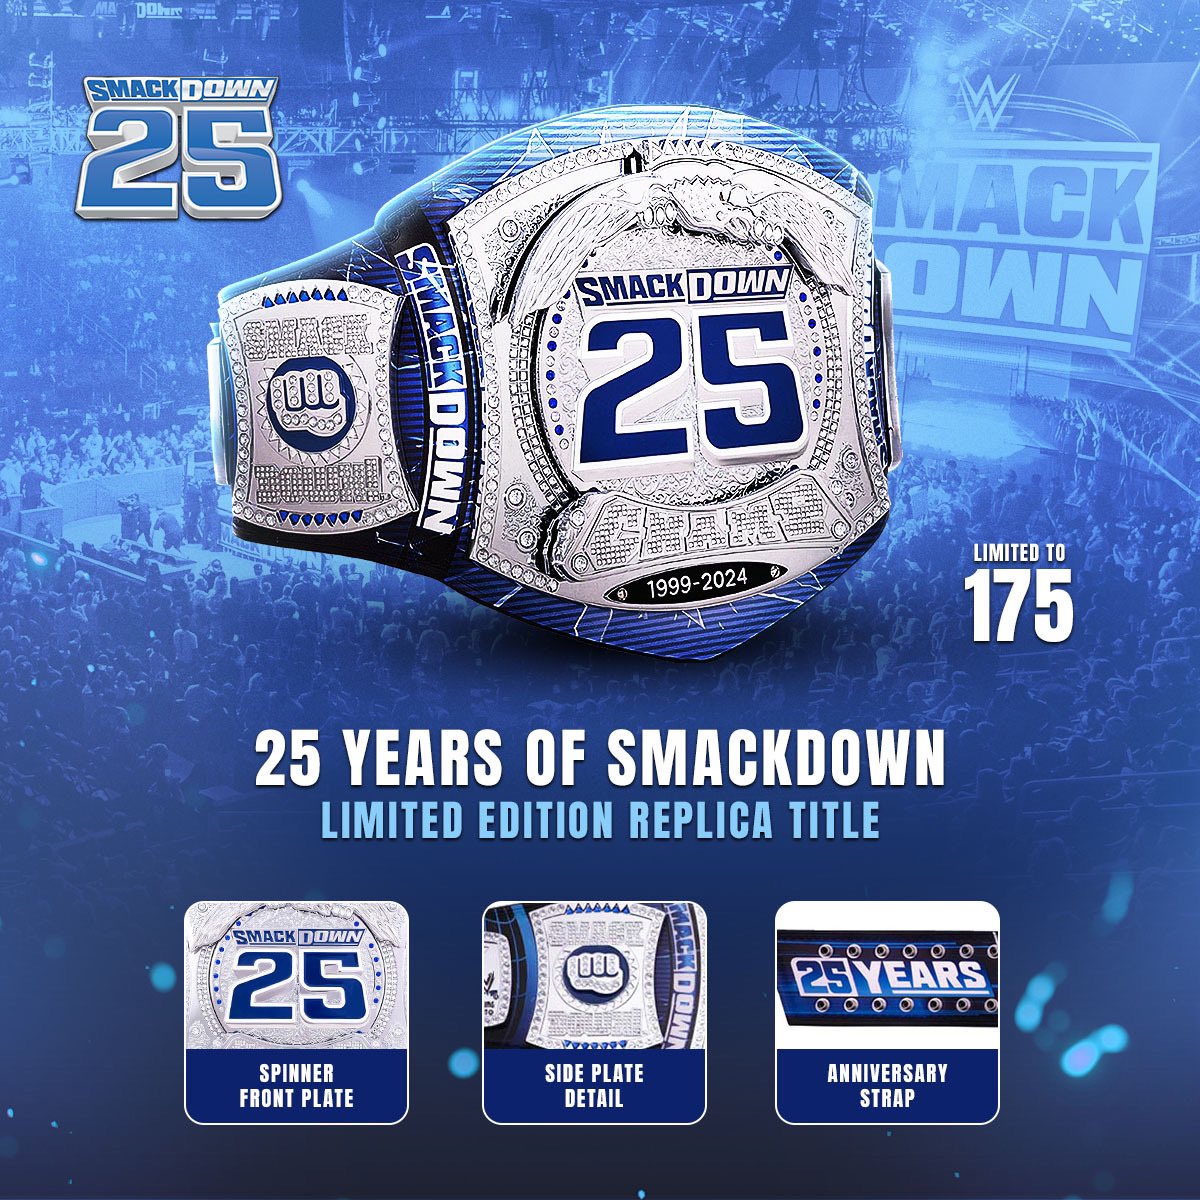 Celebrate 25 Years of SmackDown with this Limited Edition Spinner Replica Title! Available NOW at #WWEShop! #WWE #SmackDown 🛒: bit.ly/4aRniAq